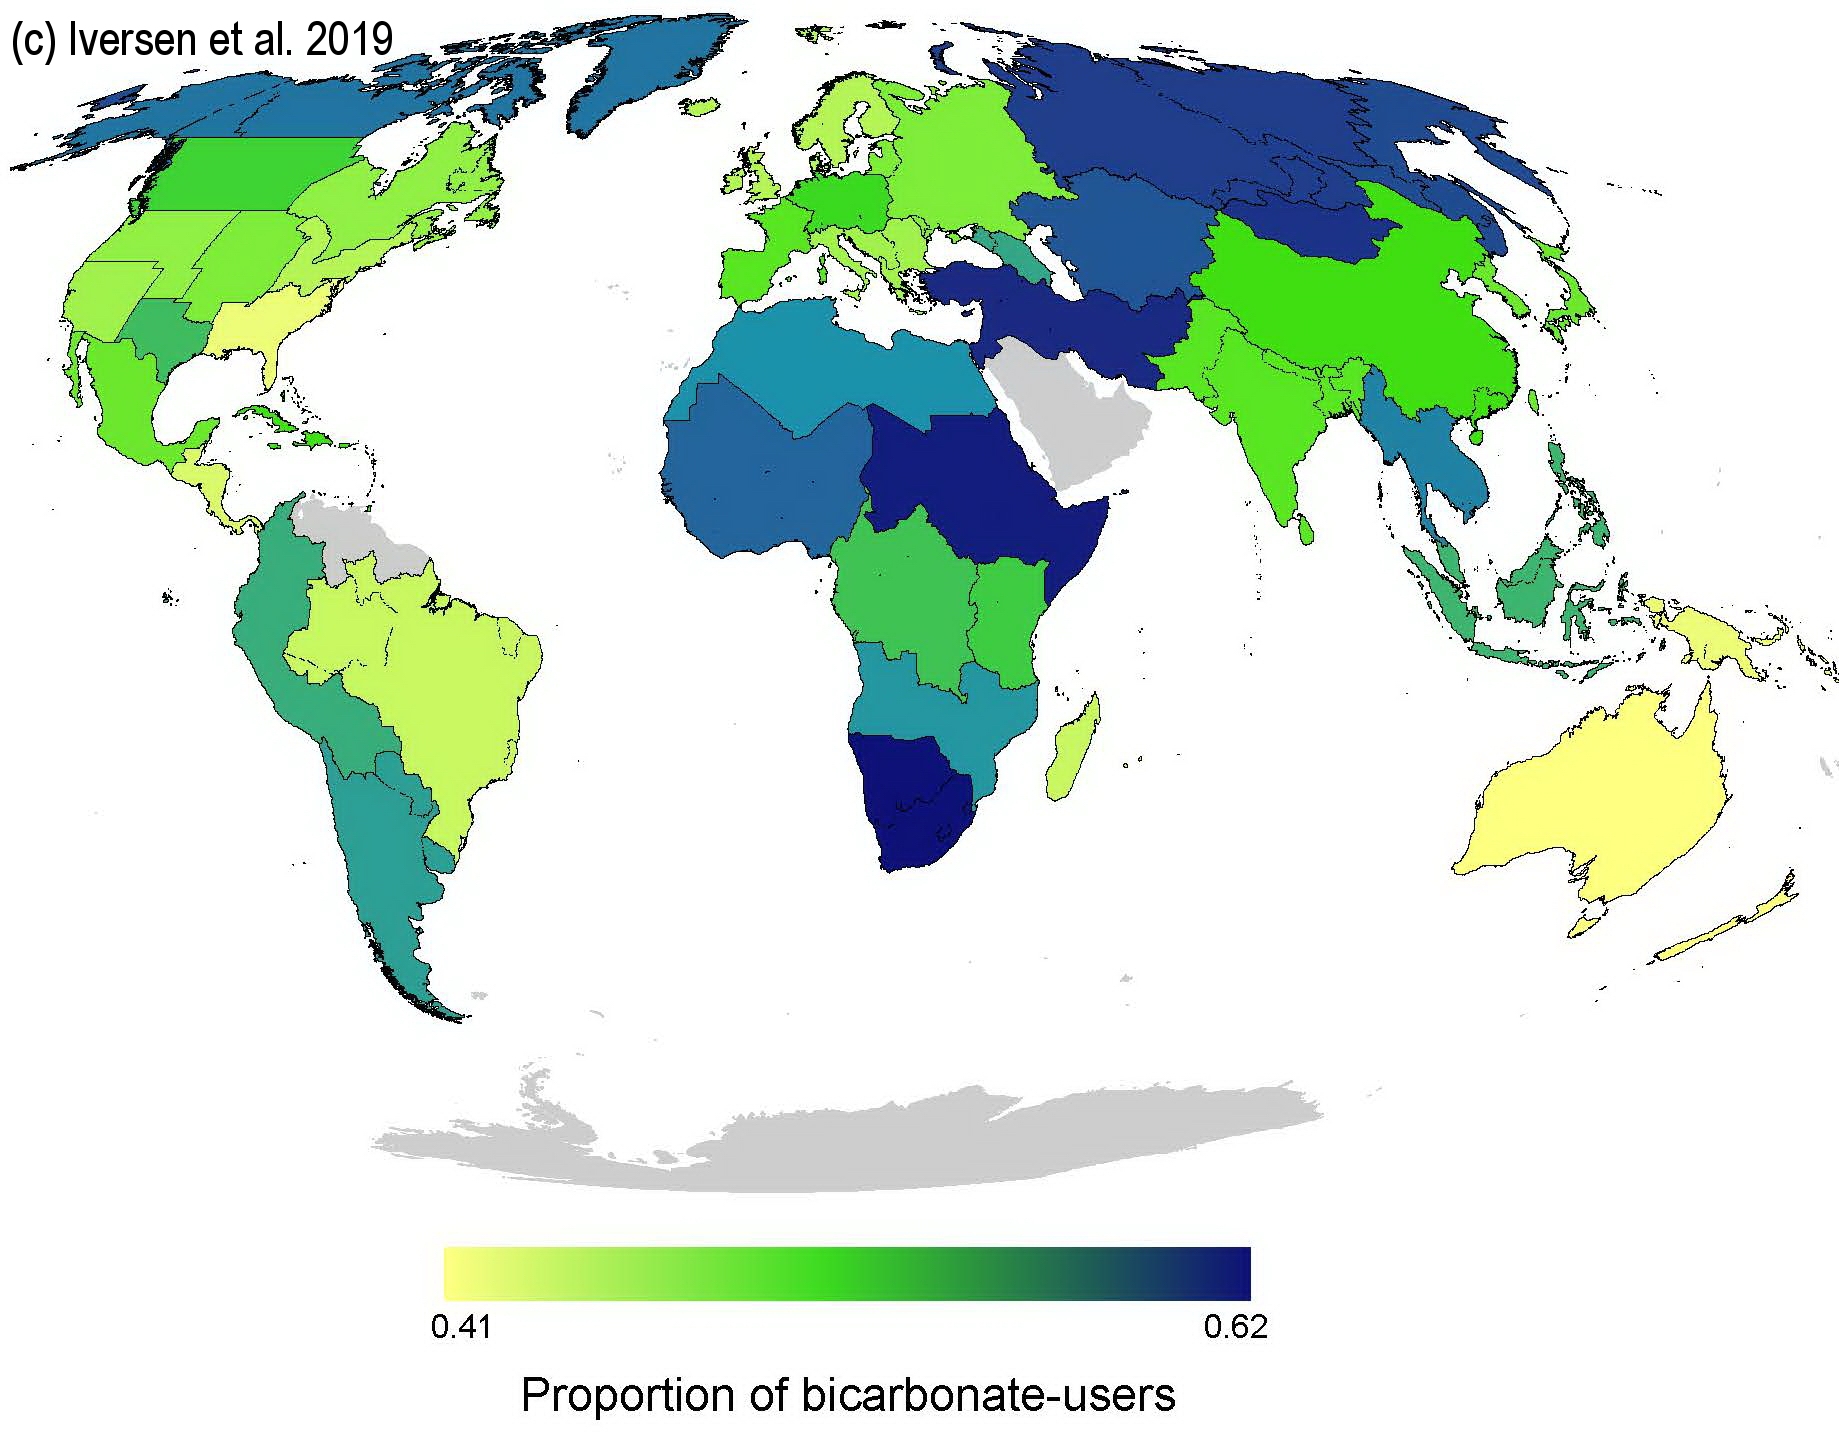 Bicarbonate users according to eco-regions (Figure 1A in the publication).